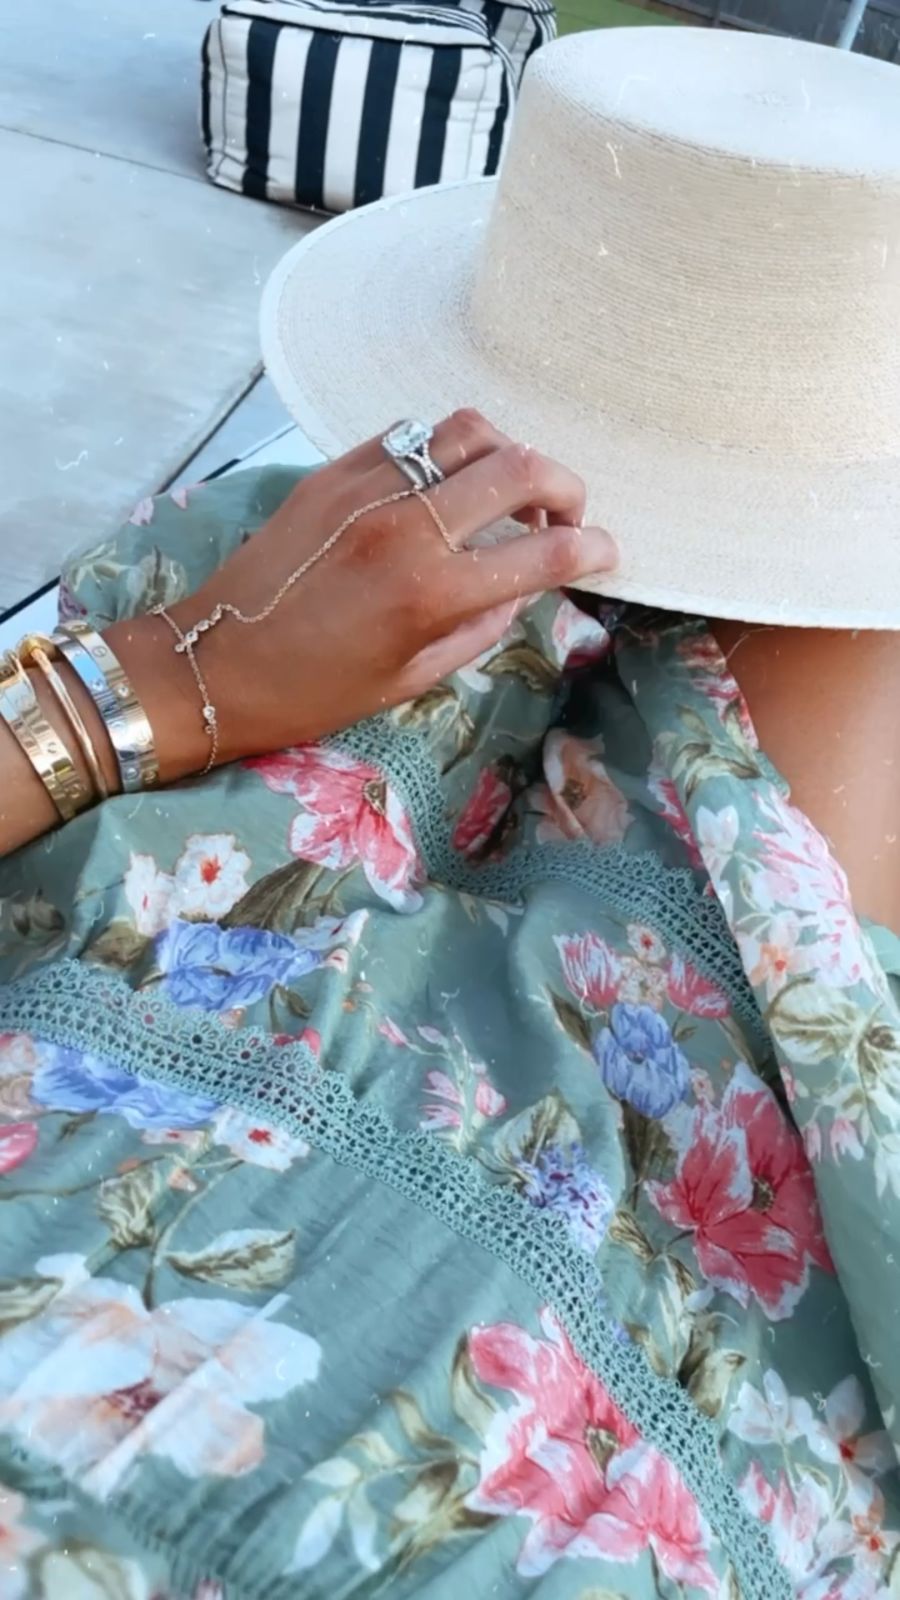 best summer dresses, affordable summer dresses 2021, wedding guest dresses, summer hats, gucci handbag, Emily ann gemma | June Instagram Recap by popular US fashion blog, The Sweetest Thing: image of Emily Gemma wearing a floral print midi dress and holding a white straw boater hat.  